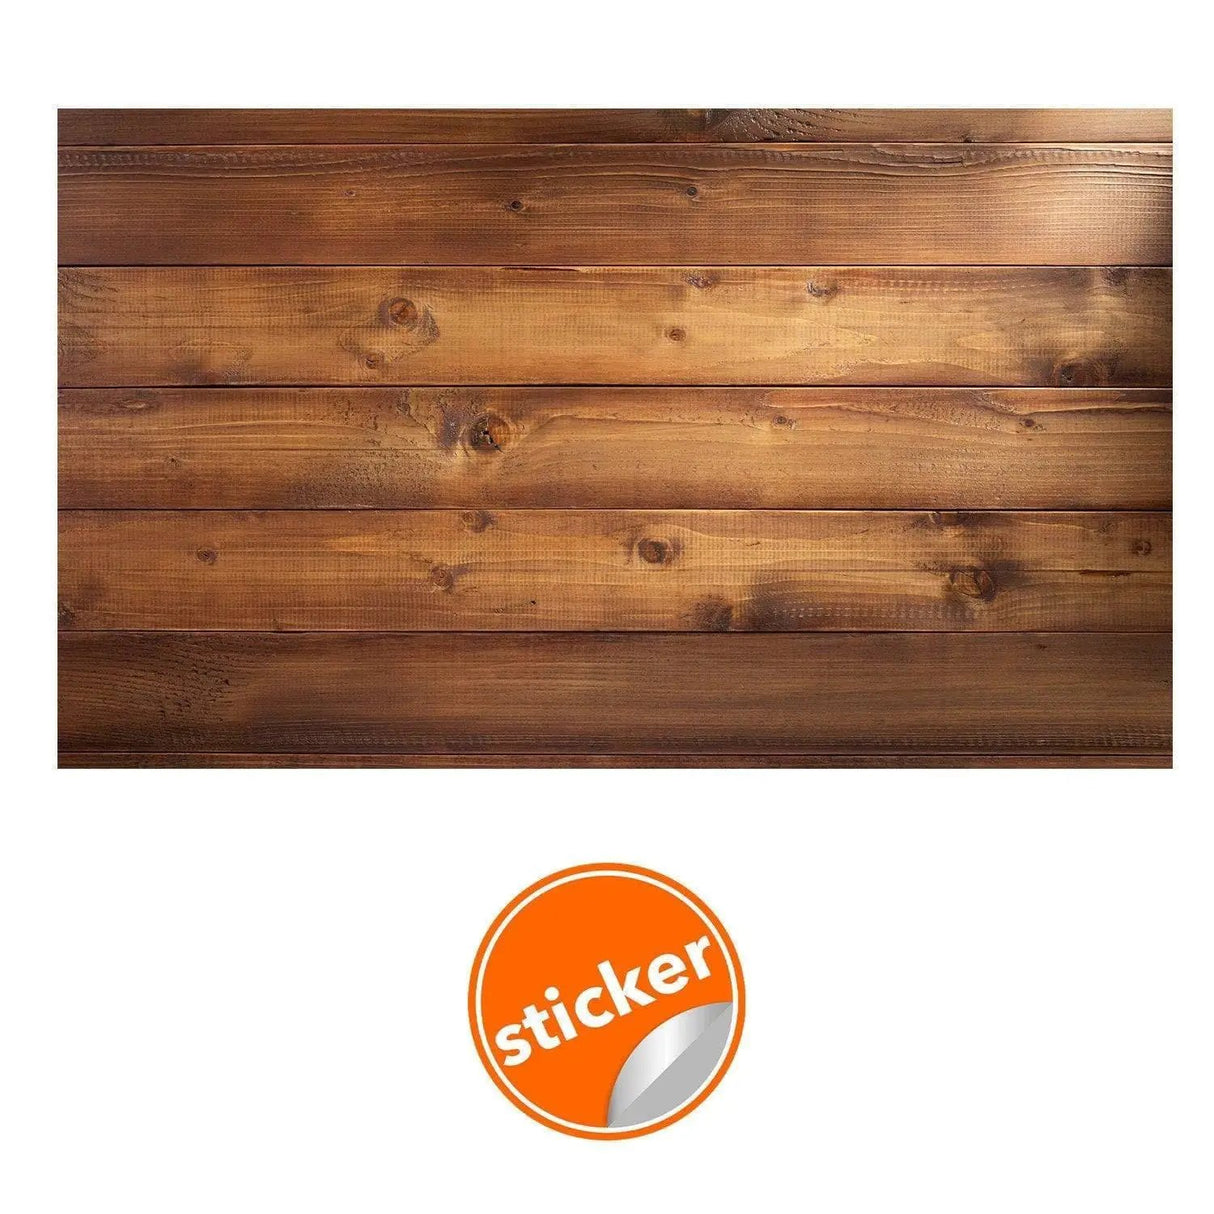 Wallpaper Wood Effect Self Adhesive Vinyl Stickers - Brown Sticky Panel For Bedroom Living Room Kitchen Wooden Peel Stick Wall Sticker Art - Decords